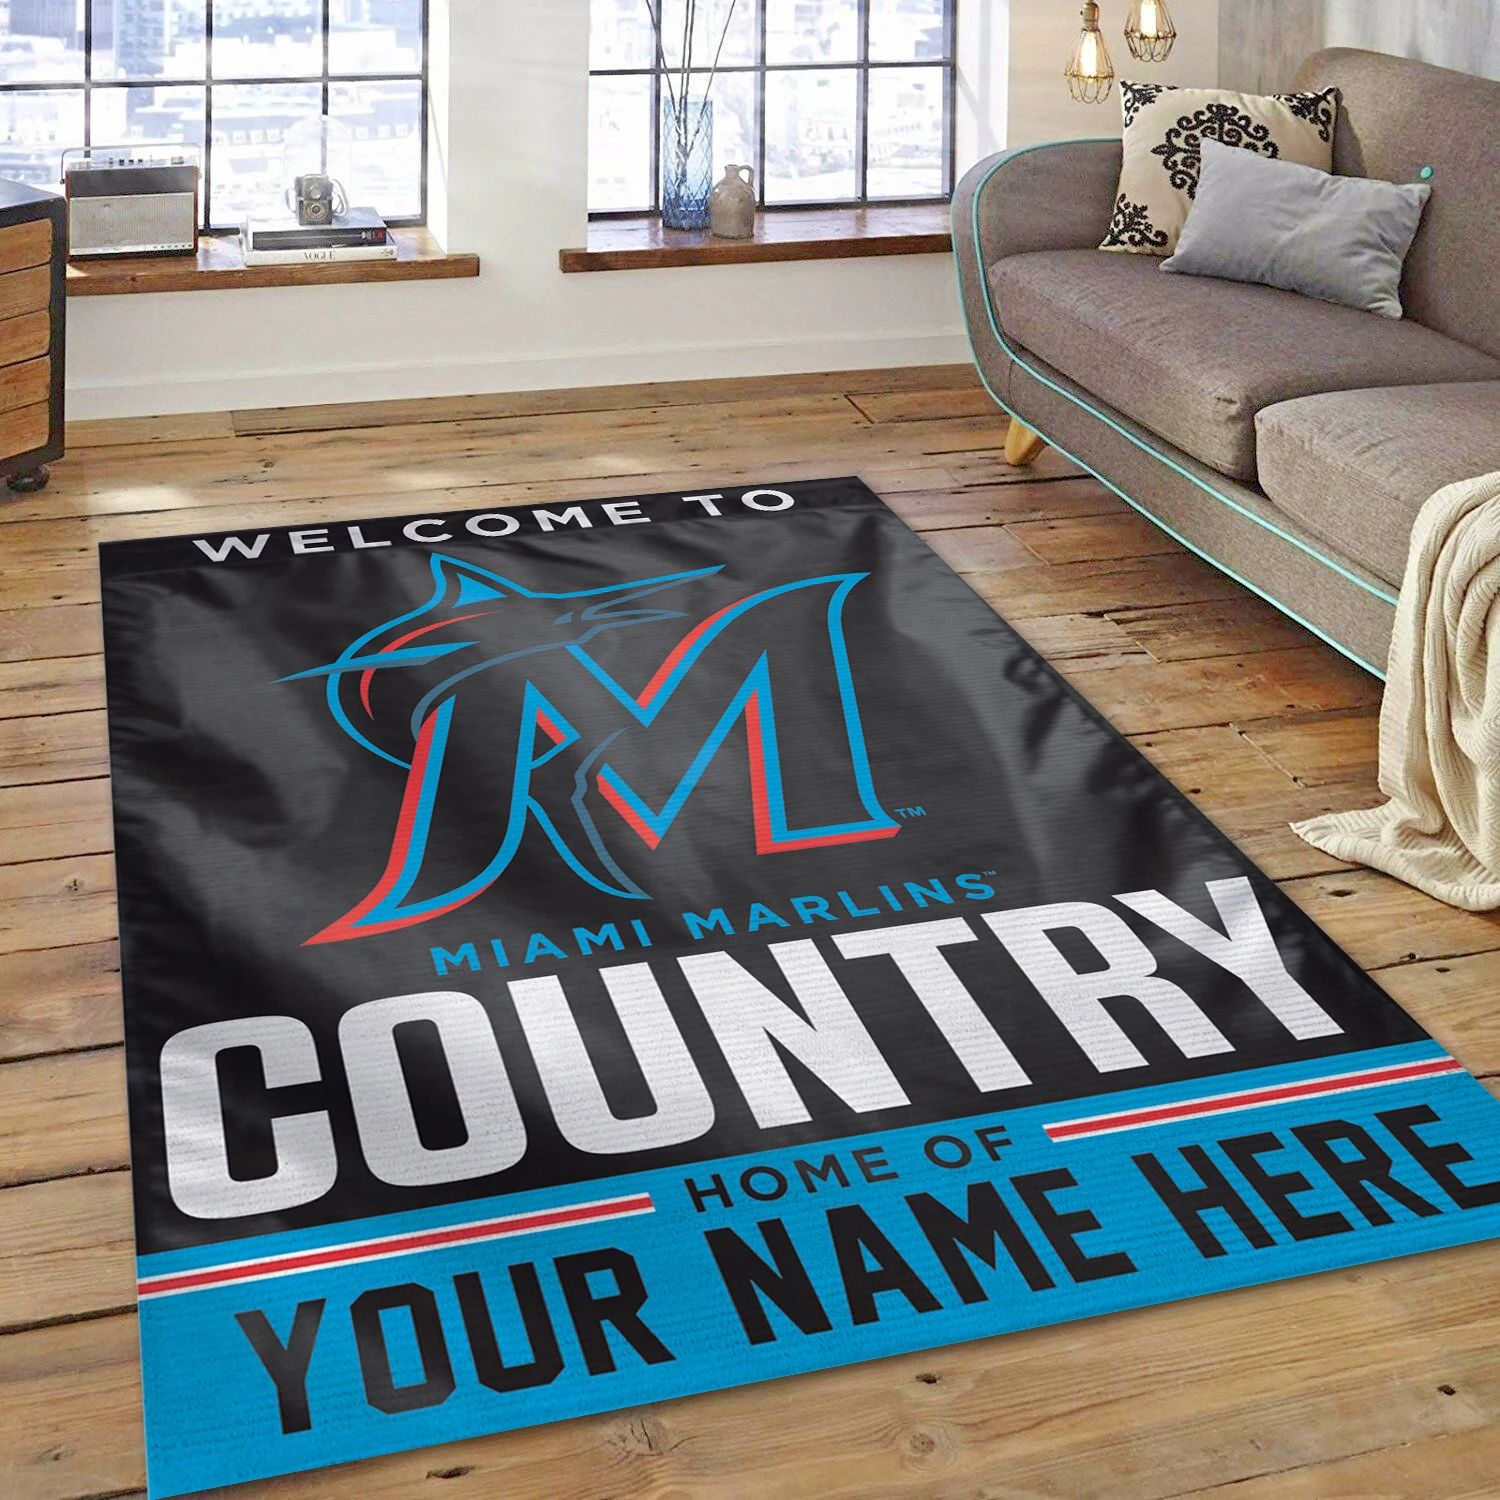 Miami Marlins Personalized MLB Area Rug, Living Room Rug - Home Decor - Indoor Outdoor Rugs 1